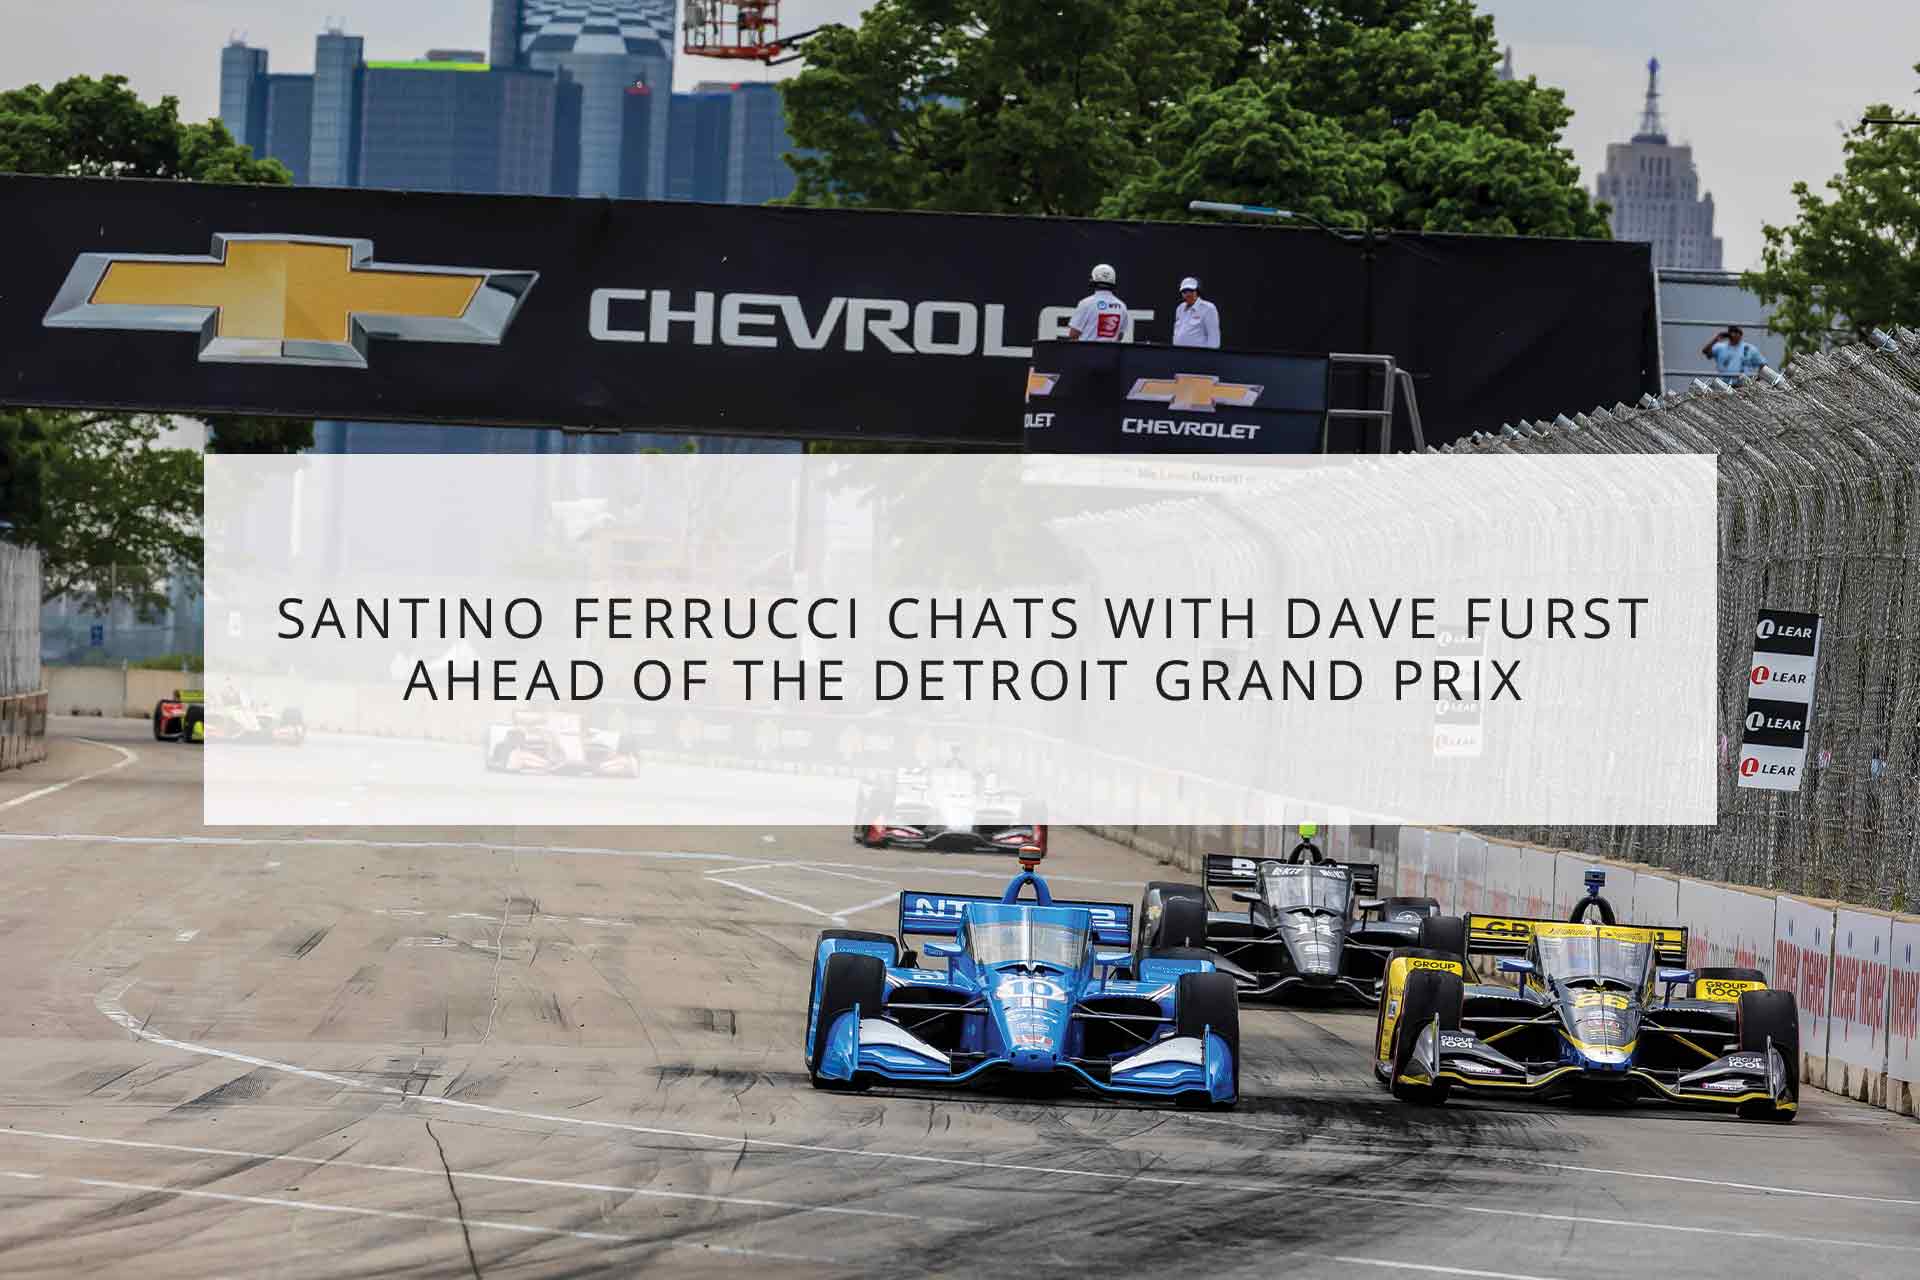 Santino Ferrucci chats with Dave Furst ahead of the Detroit Grand Prix.